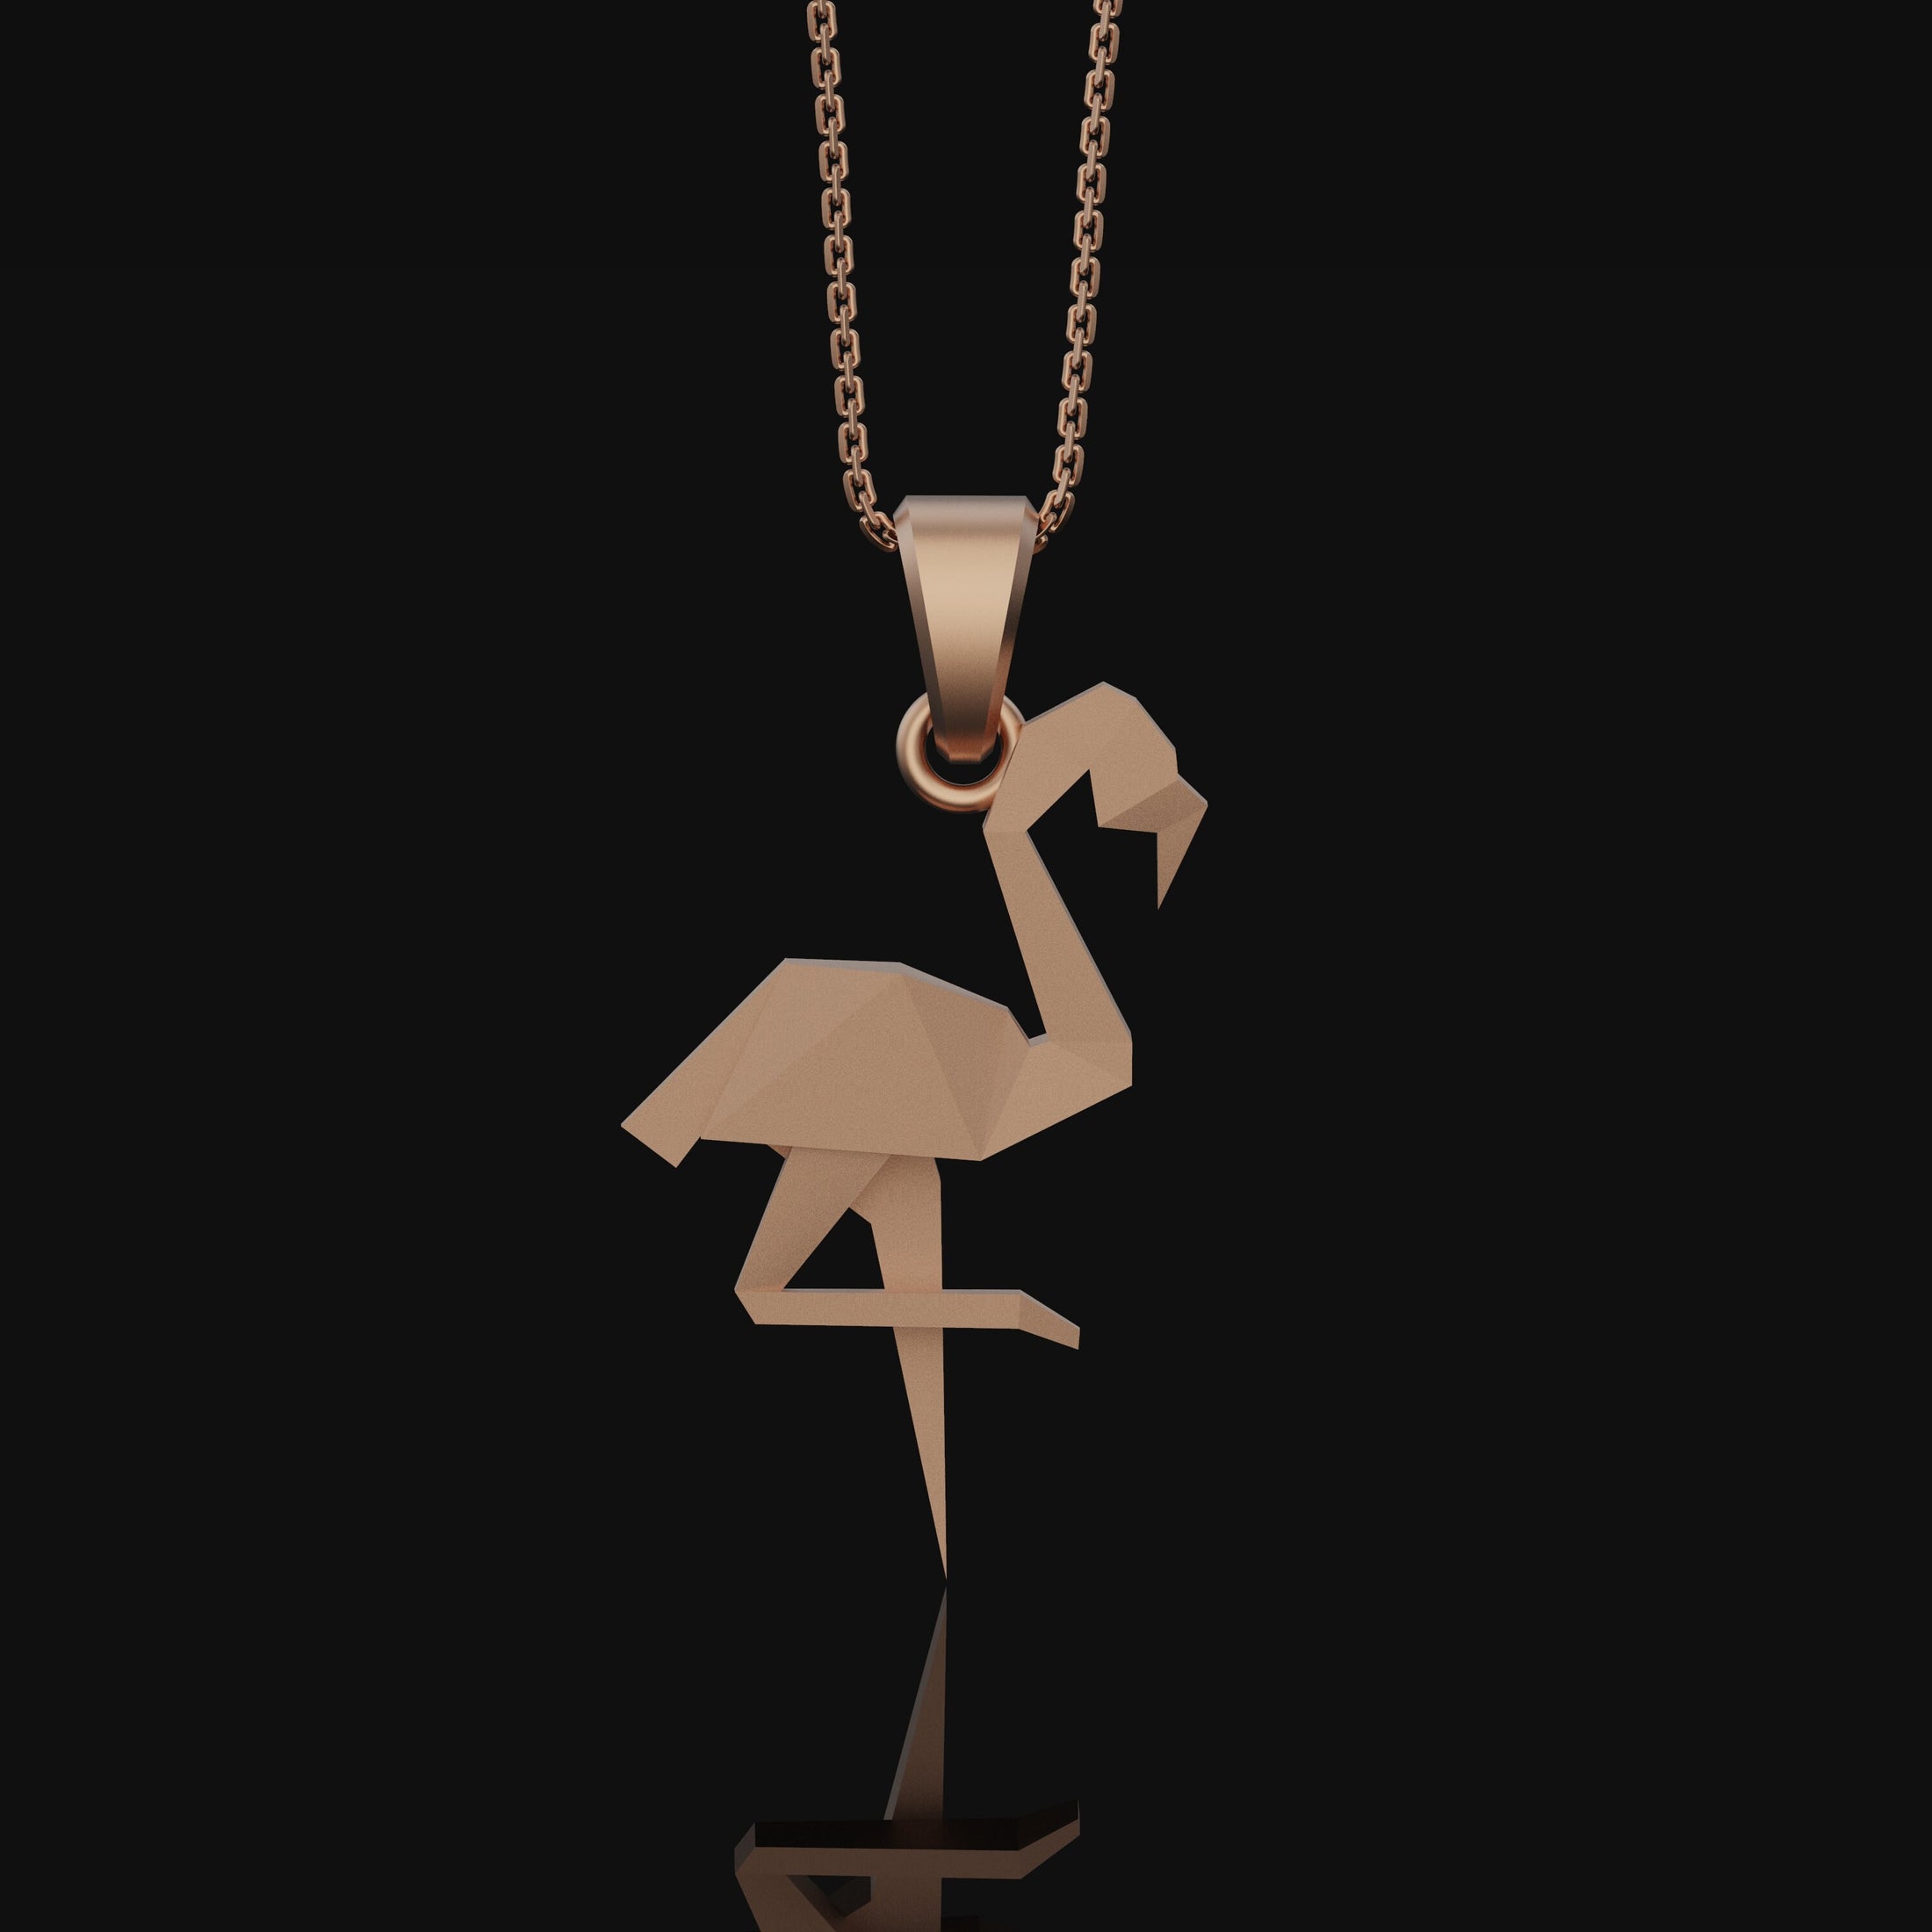 Silver Origami Flamingo Necklace Gift for her, Geometric Necklace, Bird Charm, Flamingo Pendant, Christmas Gift, Origami Animal Rose Gold Matte